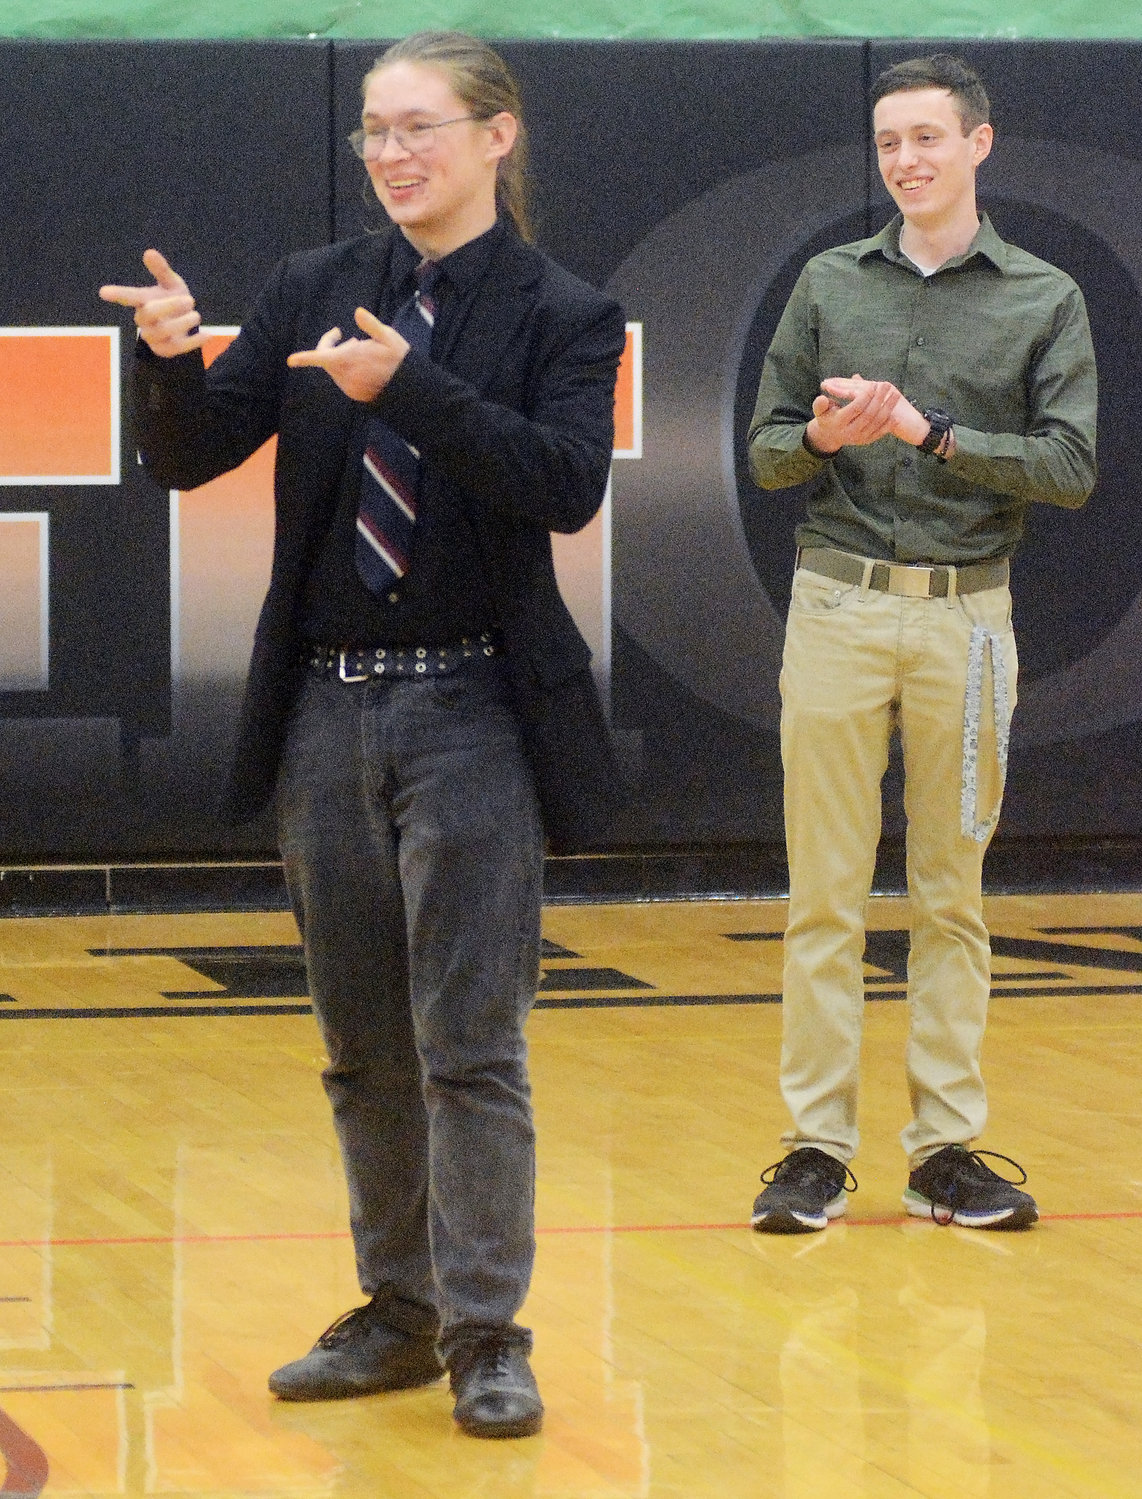 Owensville High School’s Caden Binkhoelter reacts  at being named winner of the $10,000 Gasconade County Math and Science Scholarship given by the Gerald Ebker family. Applauding (right) was Binkhoelter’s OHS Class of 2022 classmate Michael Lowes who was among the 12 students from OHS and Hermann to compete for the scholarship through a testing process.